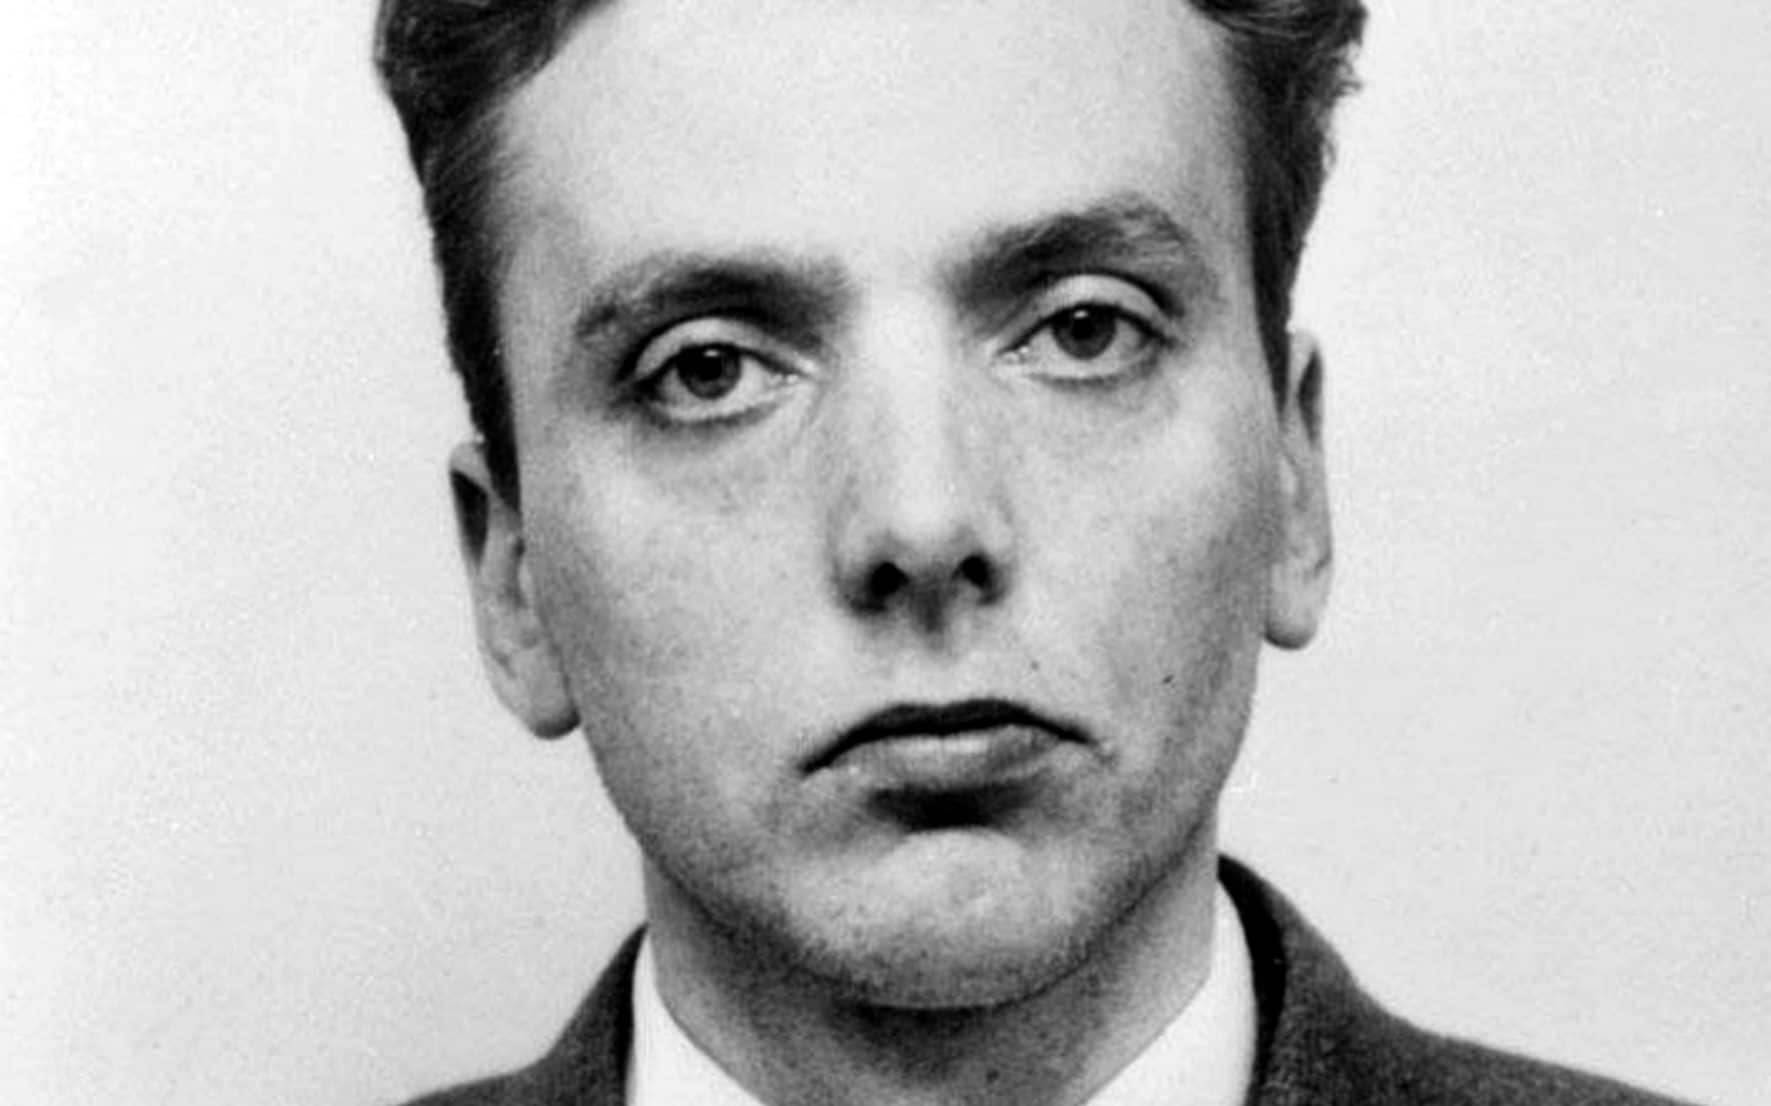 Ian Brady allowed to interact with vulnerable boys at Wormwood Scrubs prison, new files show